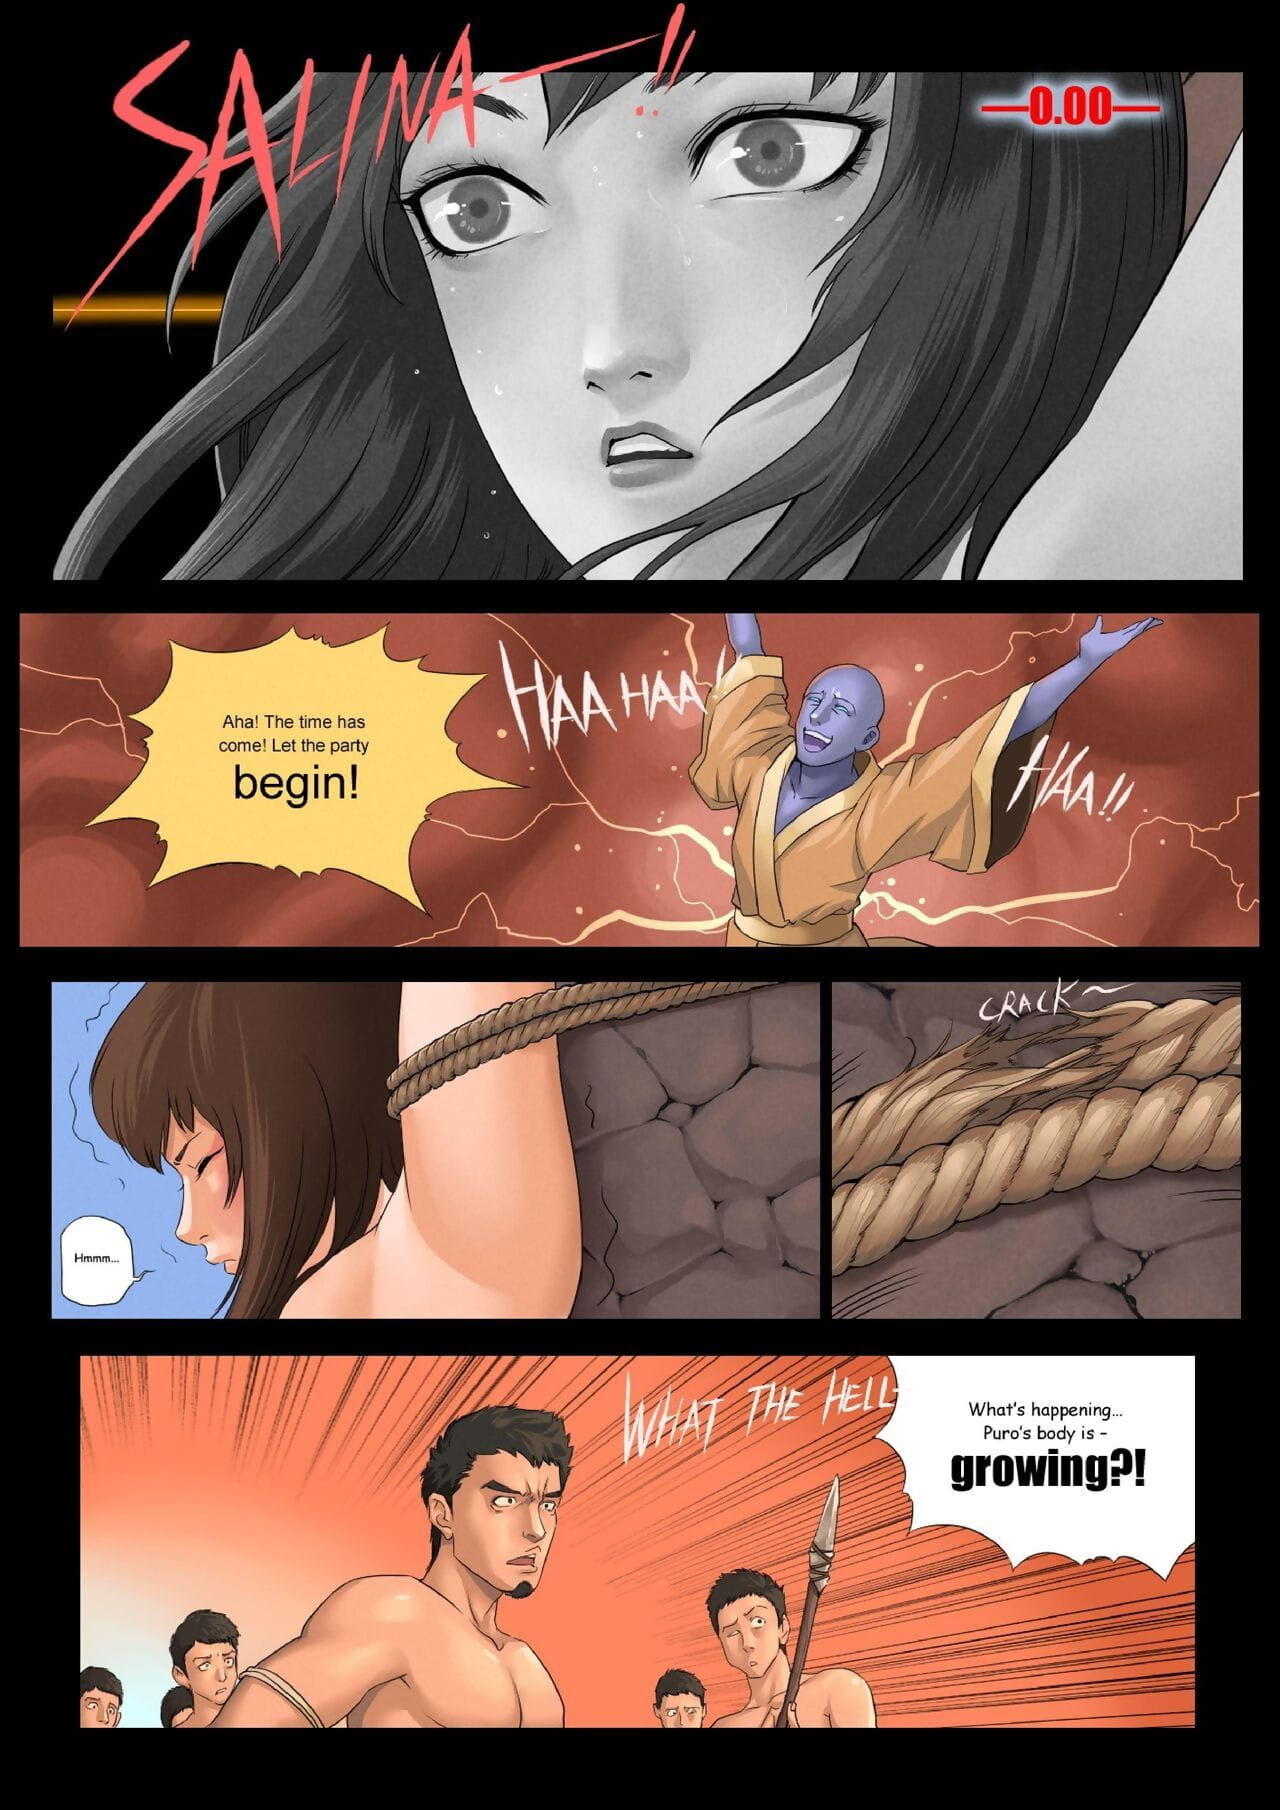 The Earth - Chapter Zero 1-2 - part 3 page 1